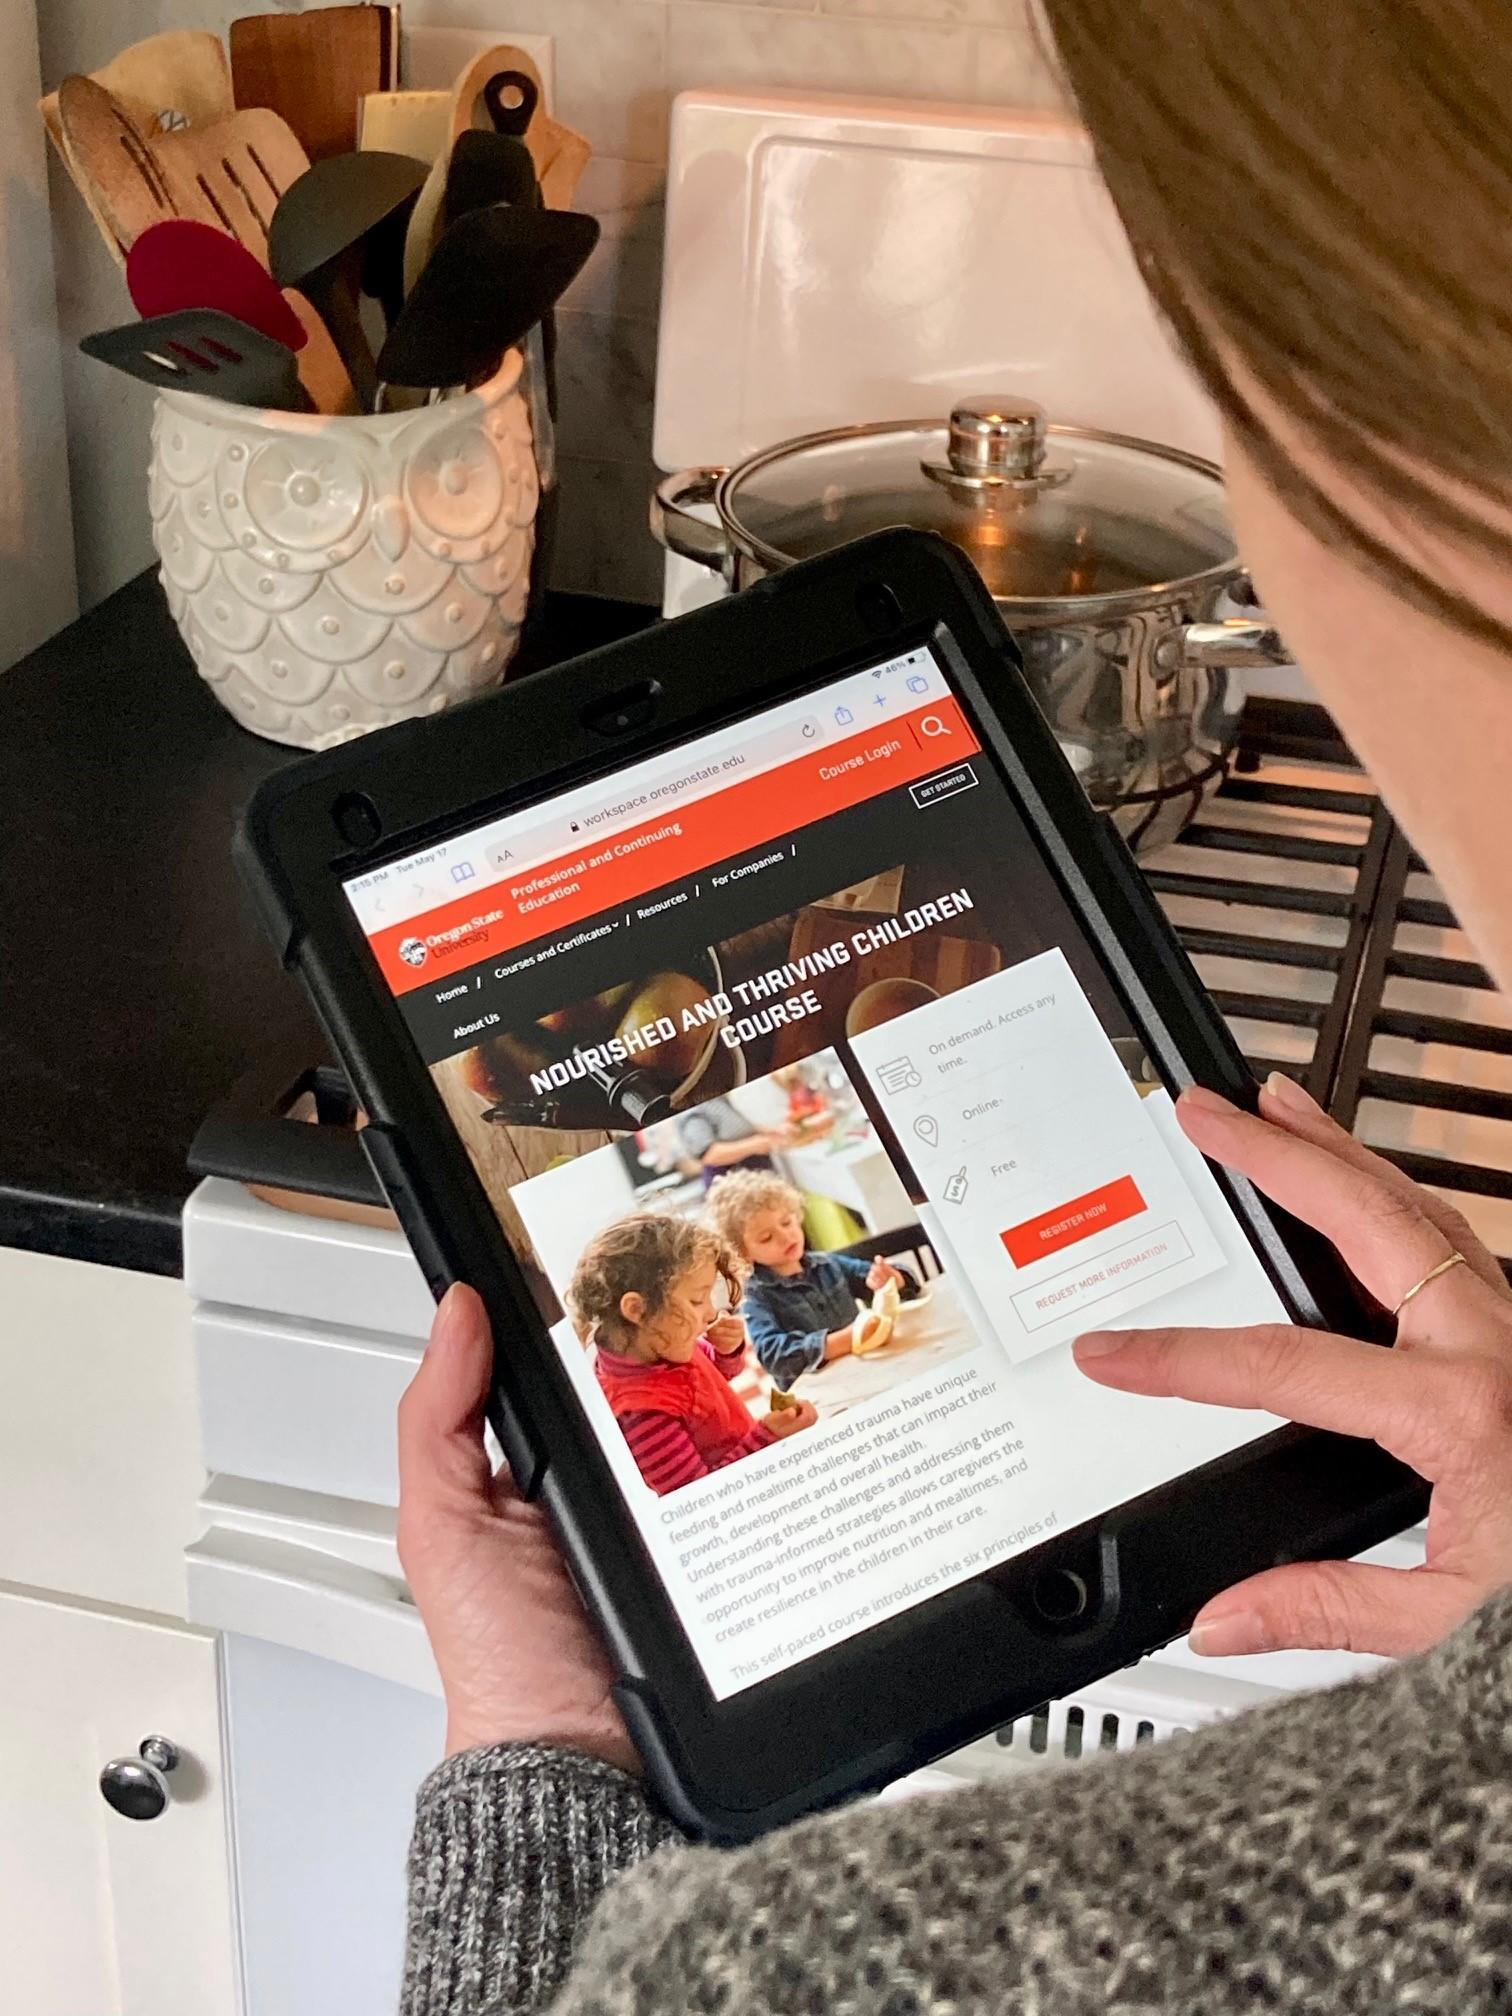 A person is reading about the course on a tablet in their kitchen.